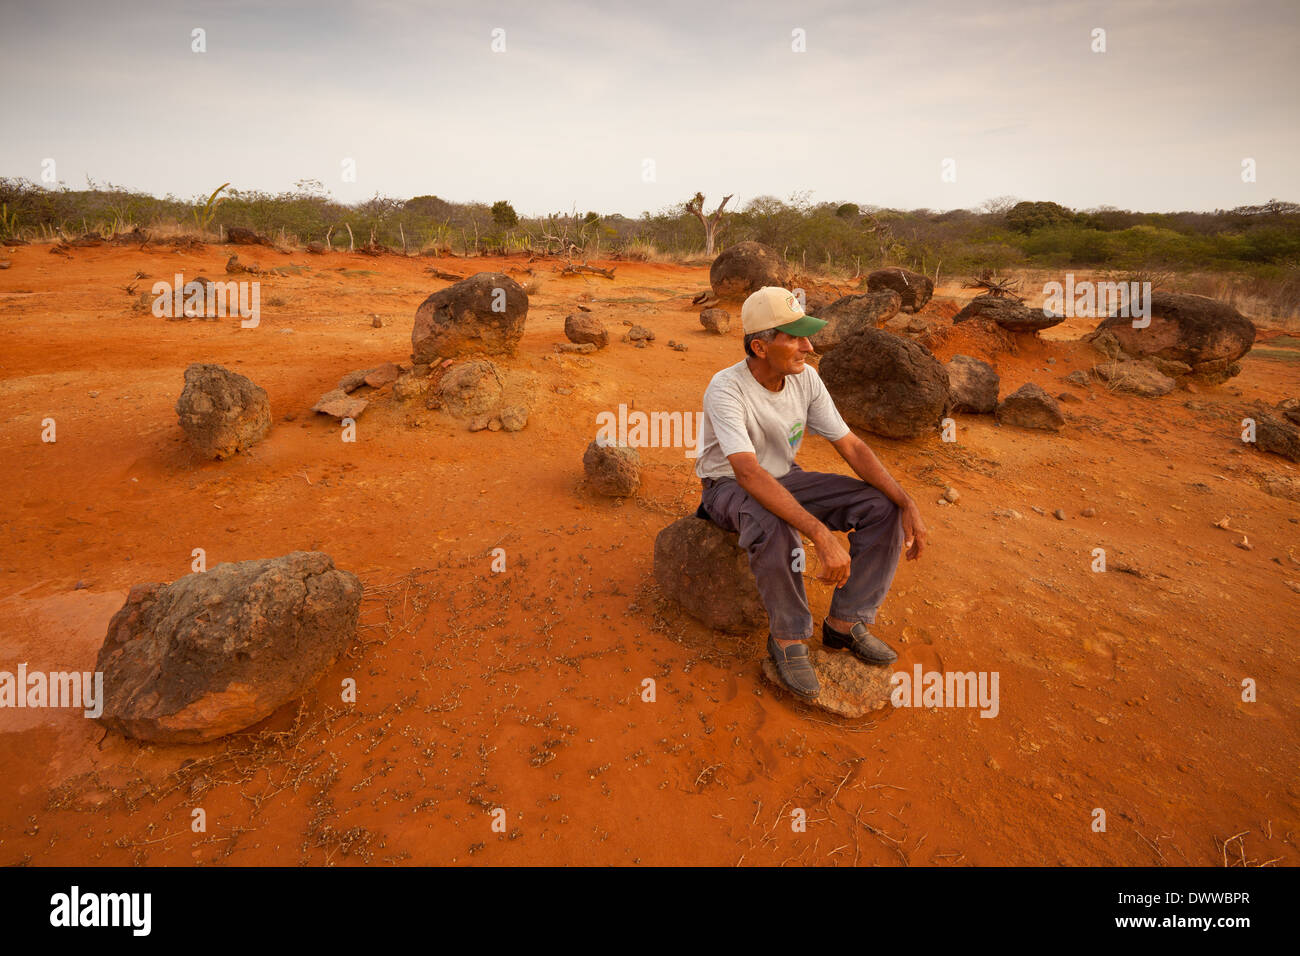 Panamanian man sits on one of the large volcanic stones in Sarigua national park, Herrera province, Republic of Panama. Stock Photo